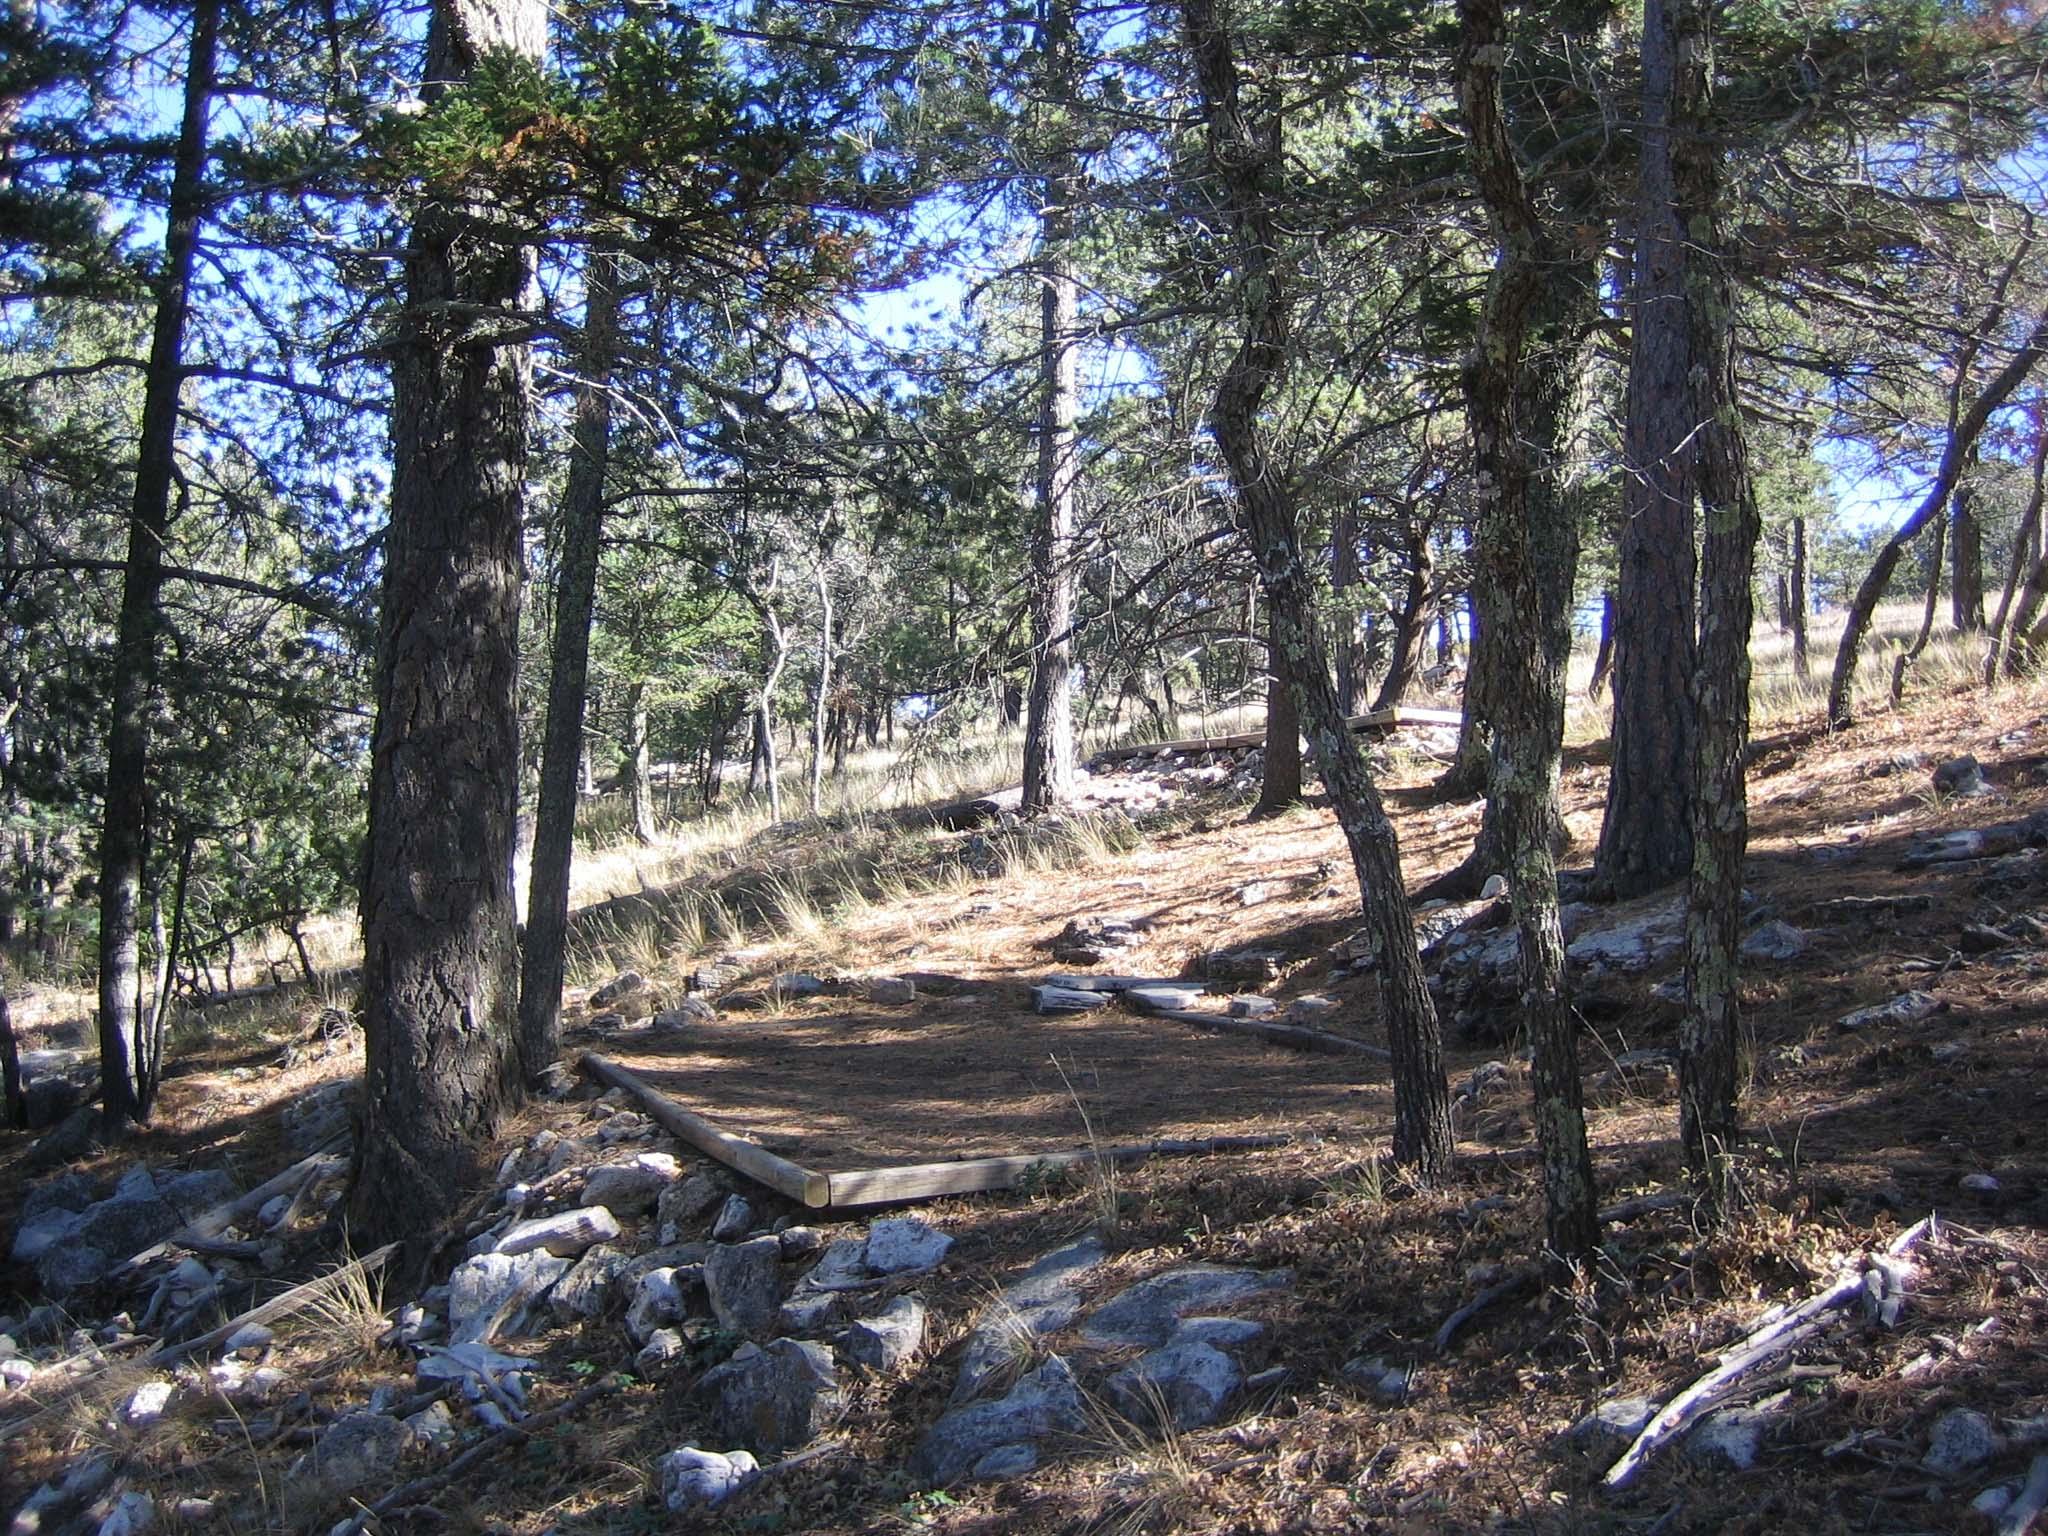 A hardened surface for a tent among rocks and trees